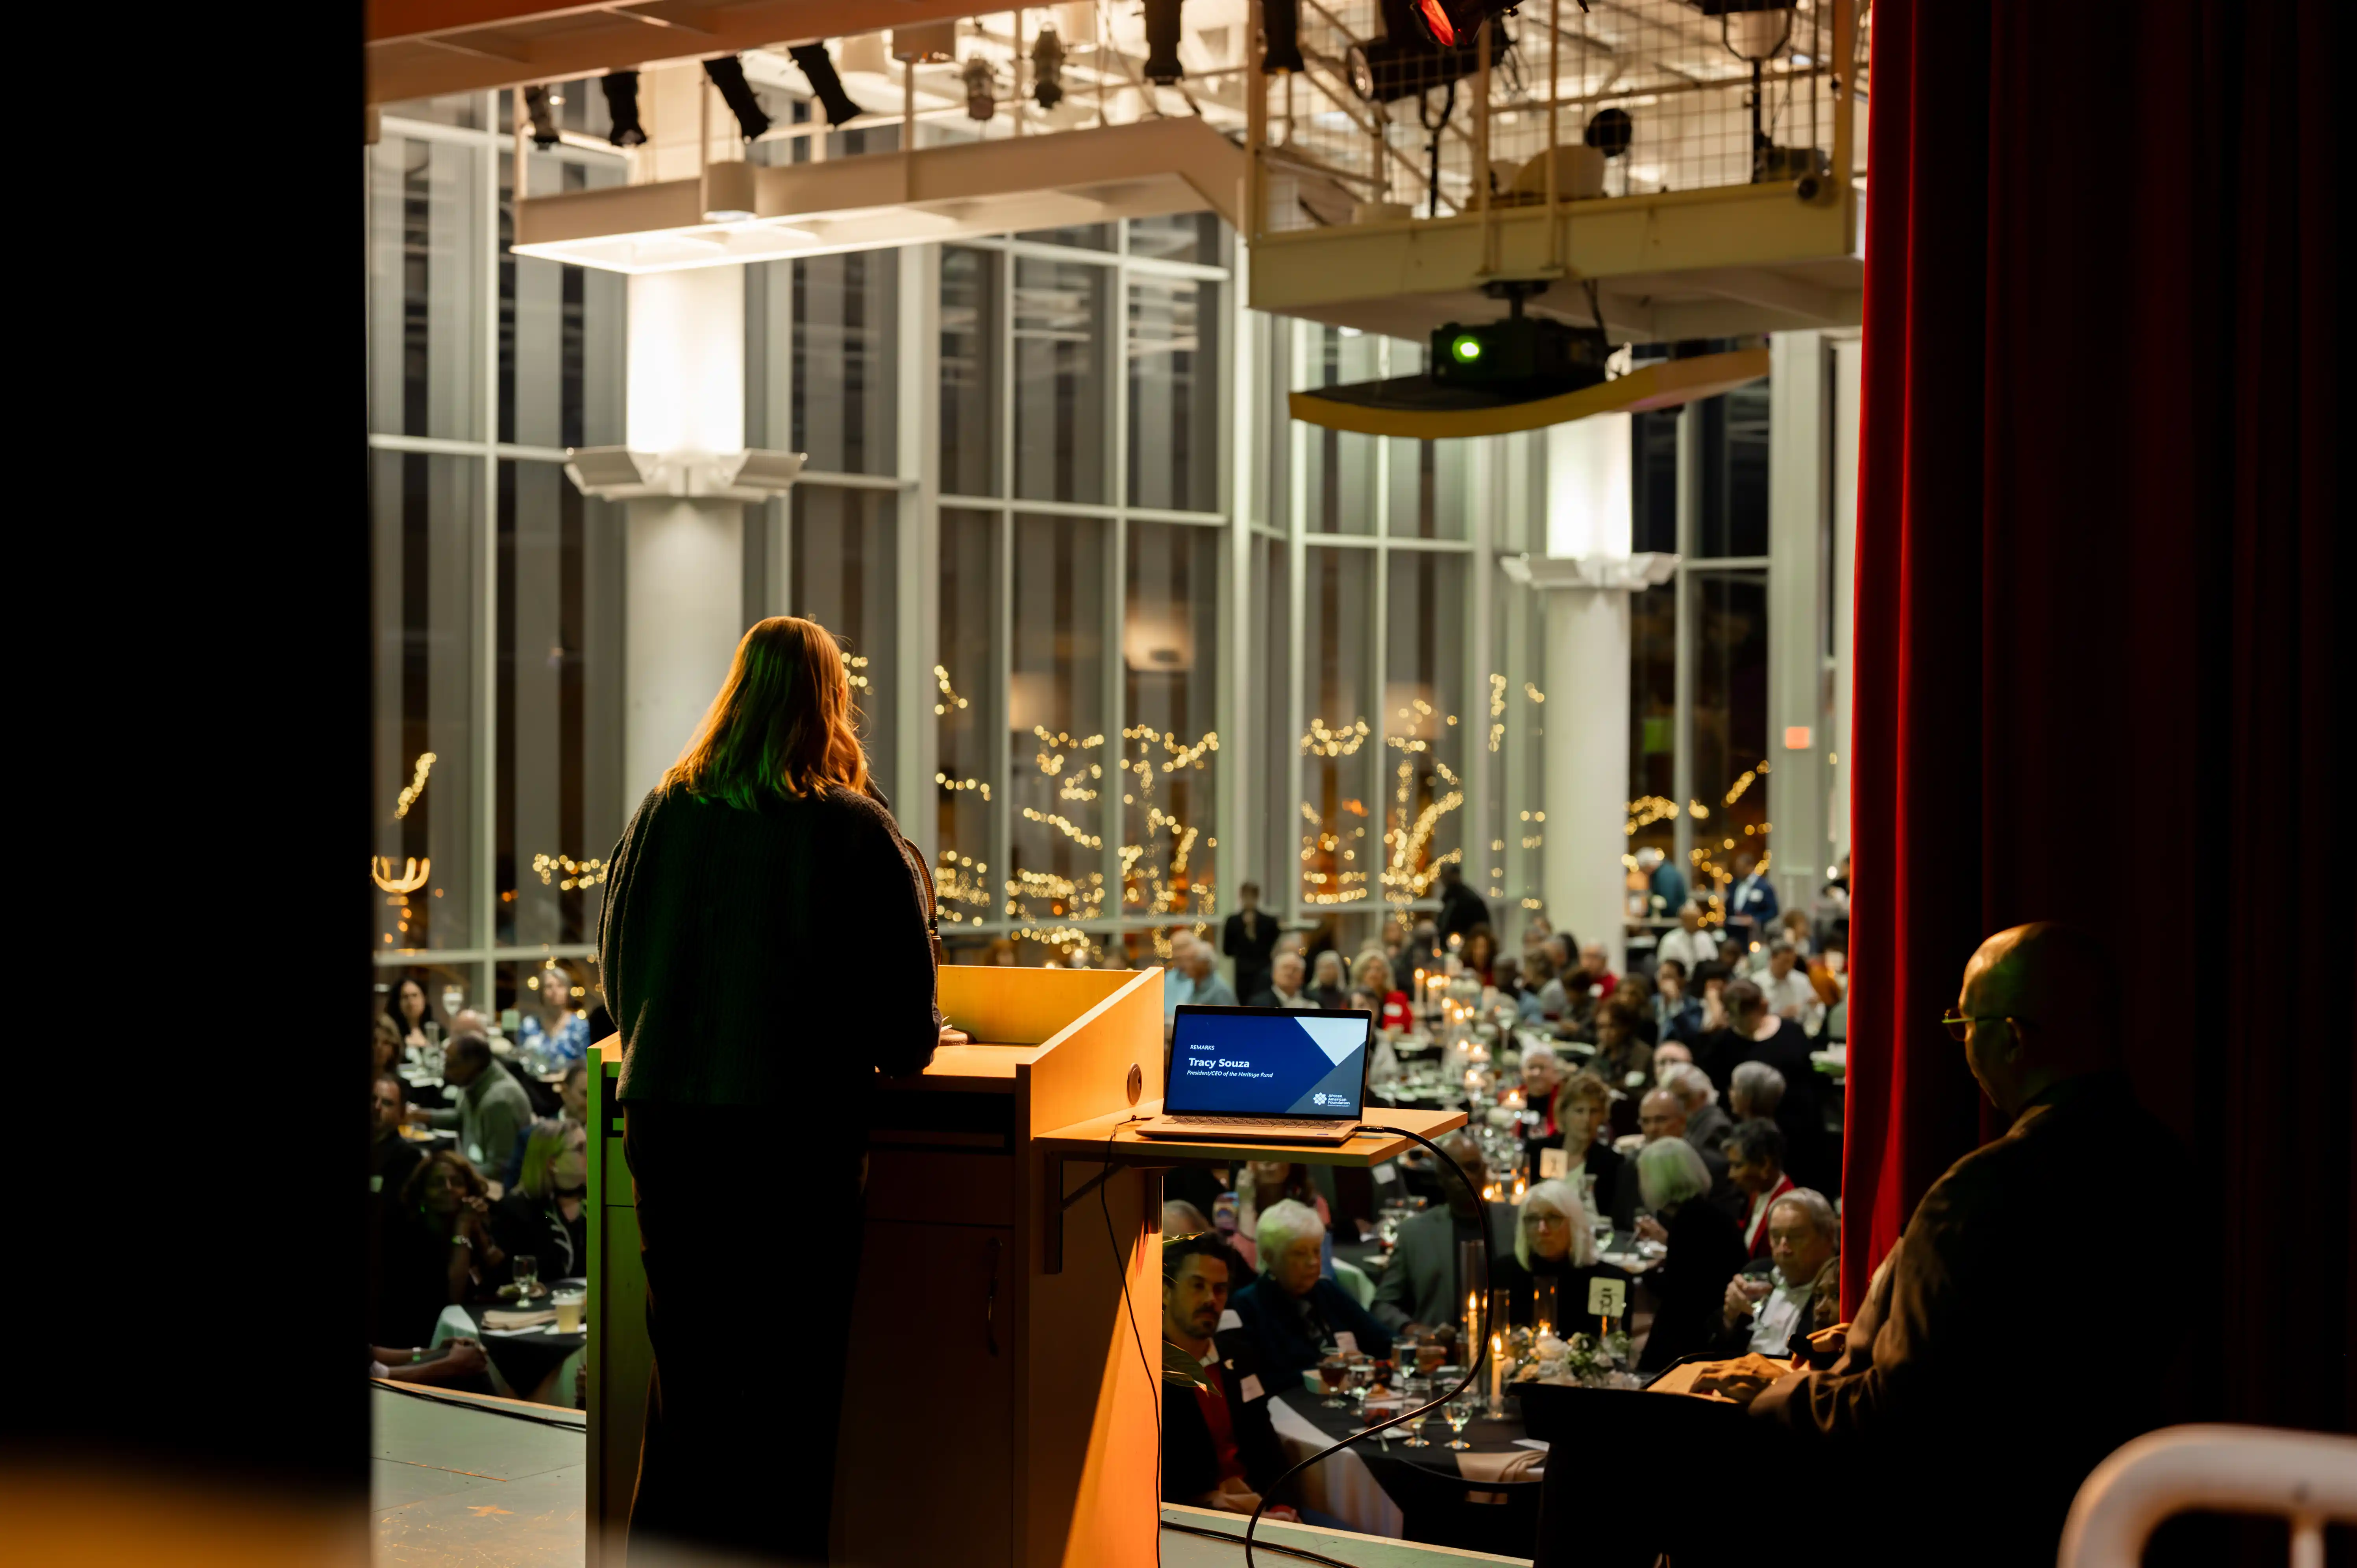 Person speaking at a podium in a banquet hall with guests seated at tables, viewed from behind the stage.